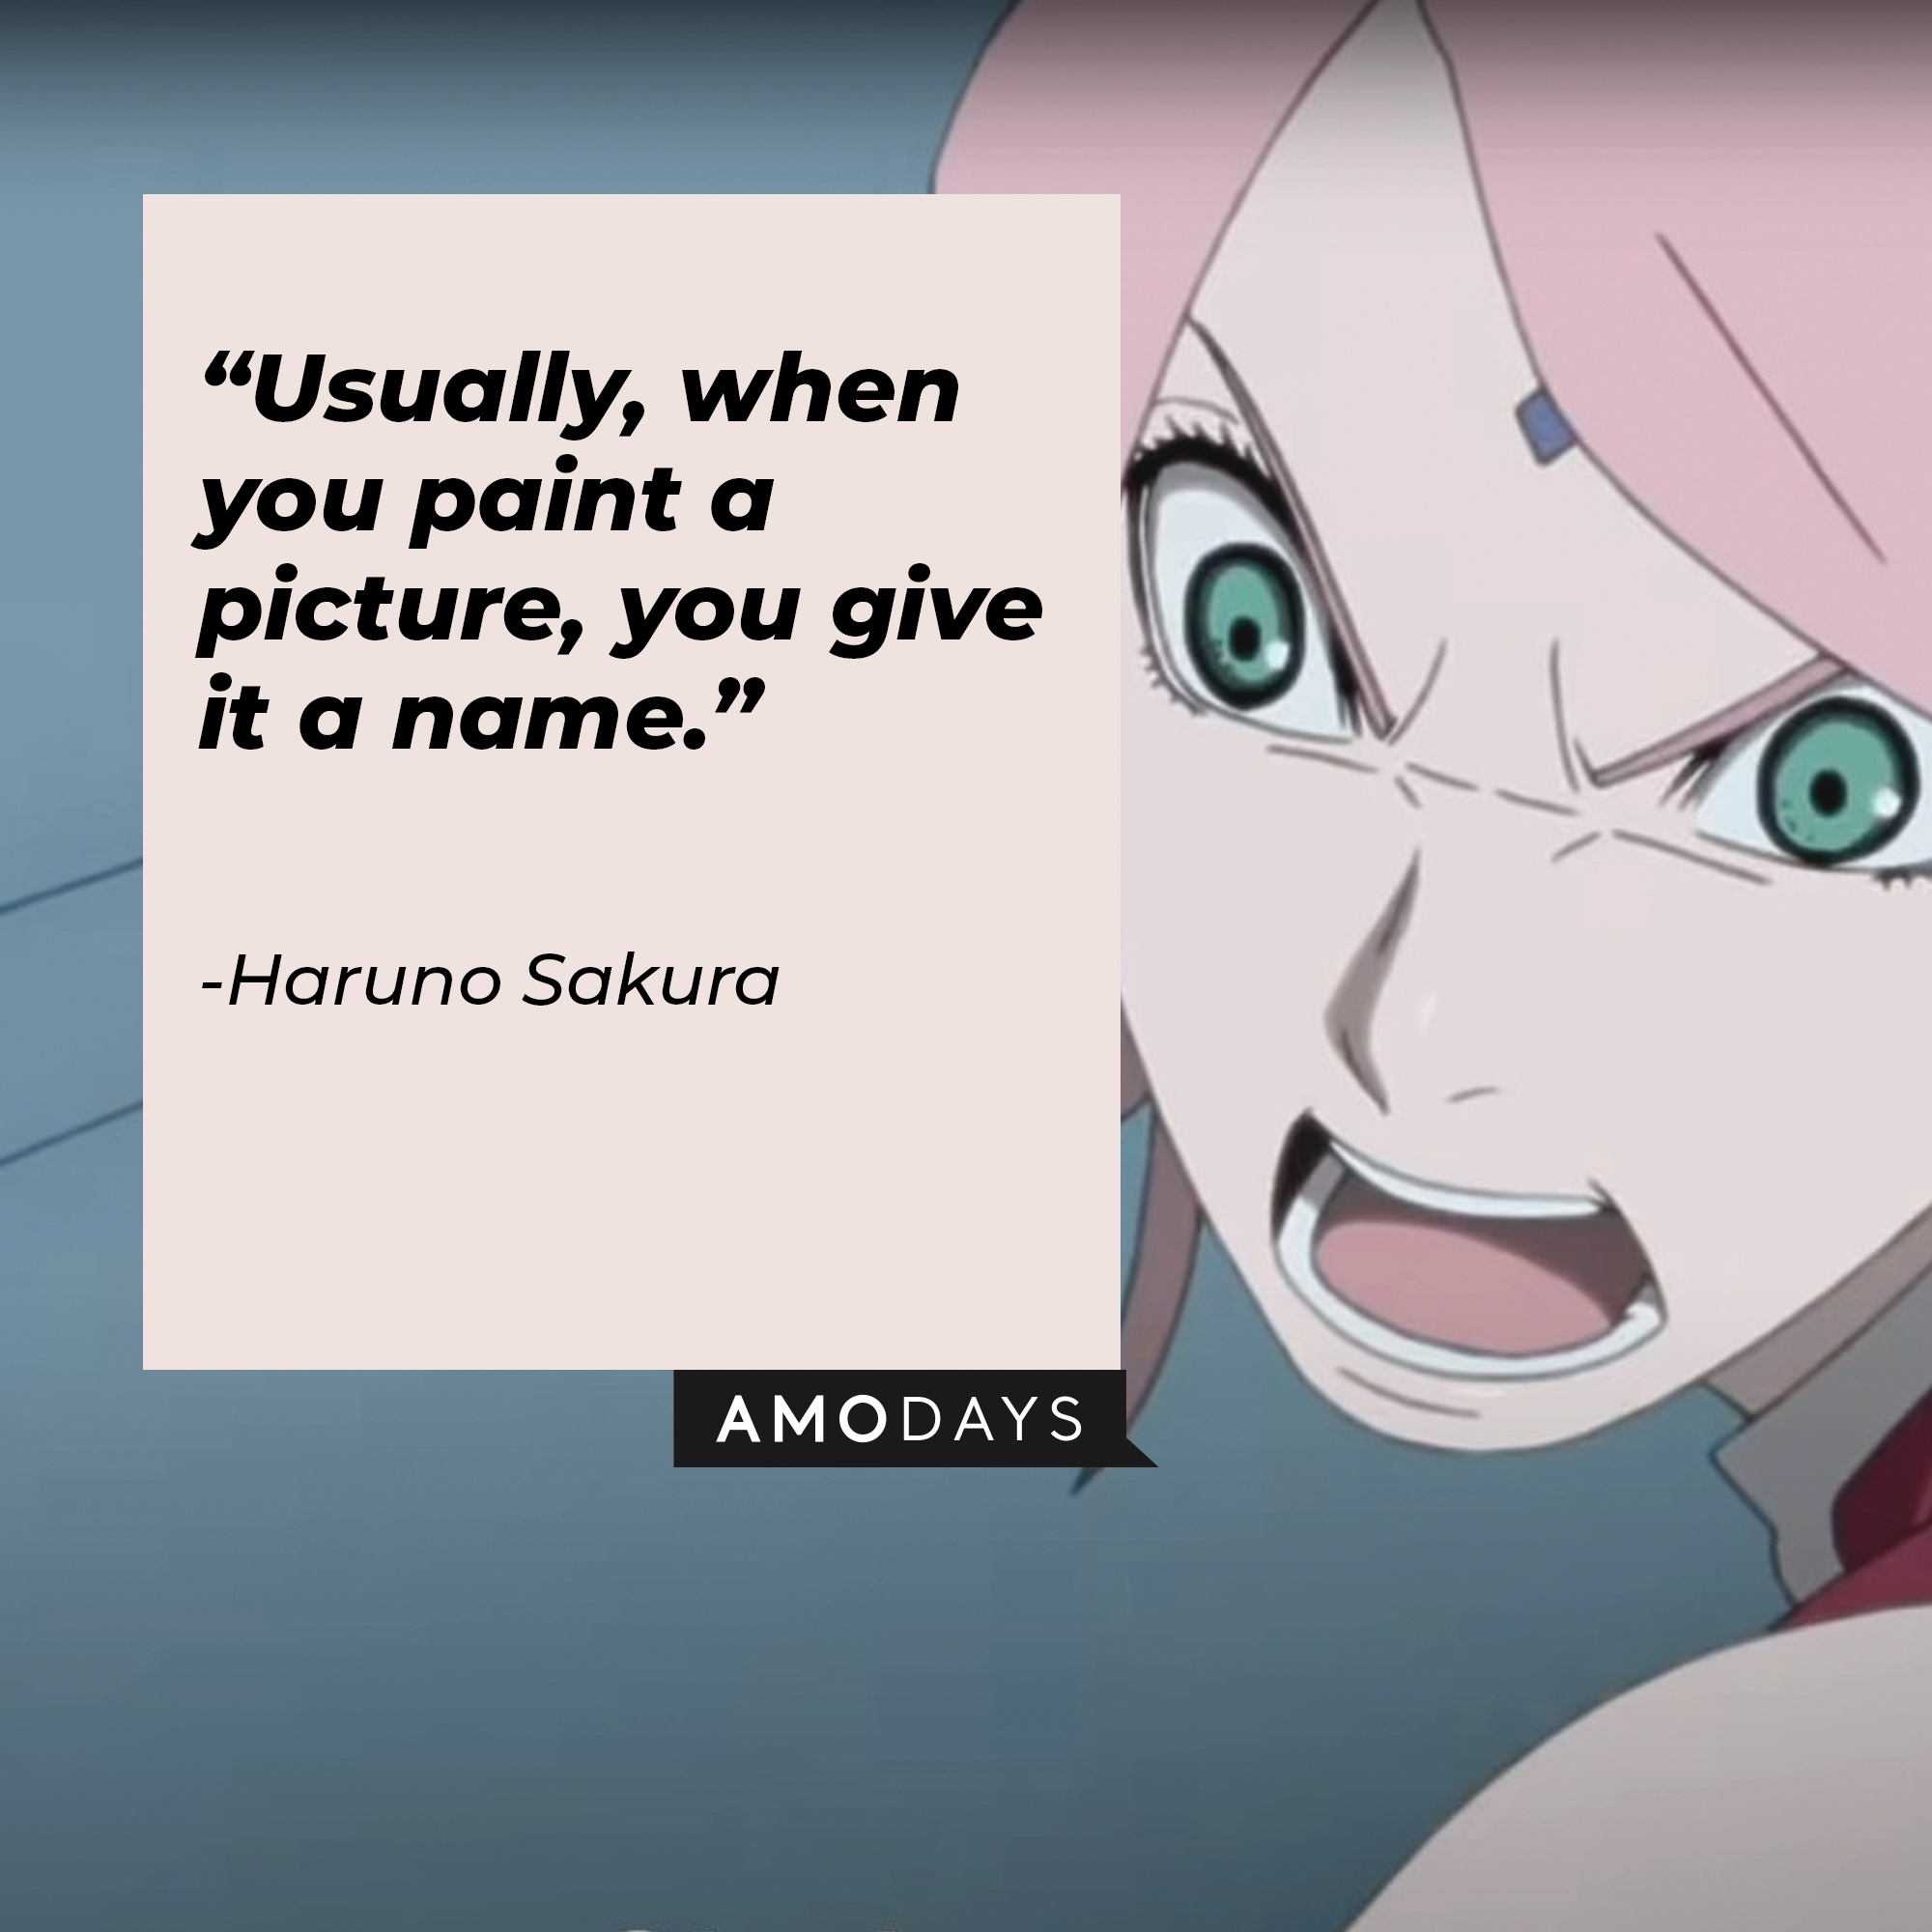 Haruno Sakura’s quote: “Usually, when you paint a picture, you give it a name.” | Source: facebook.com/narutoofficialsns